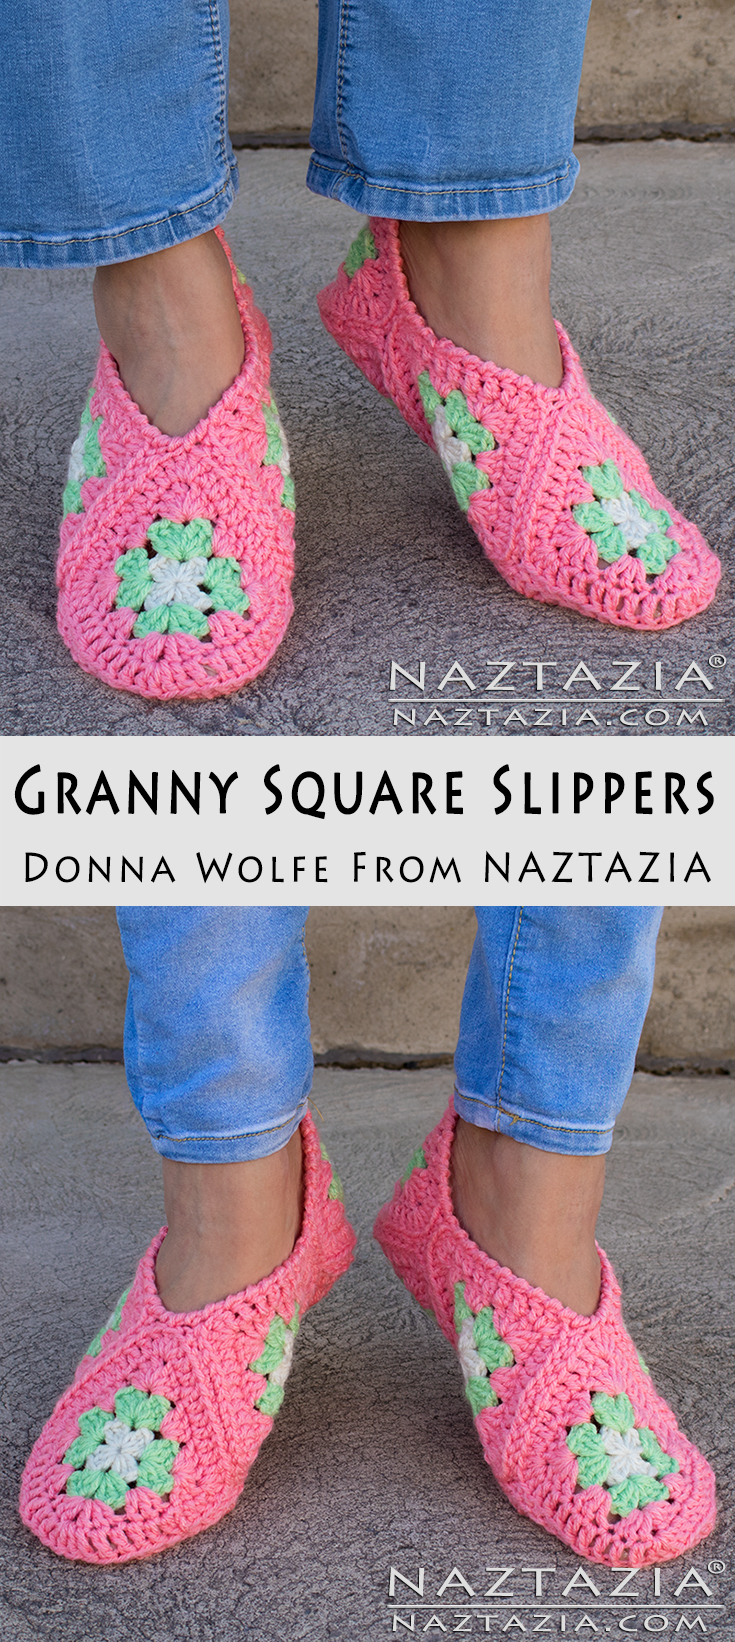 Granny Square Slippers Free Crochet Pattern and Video Tutorial